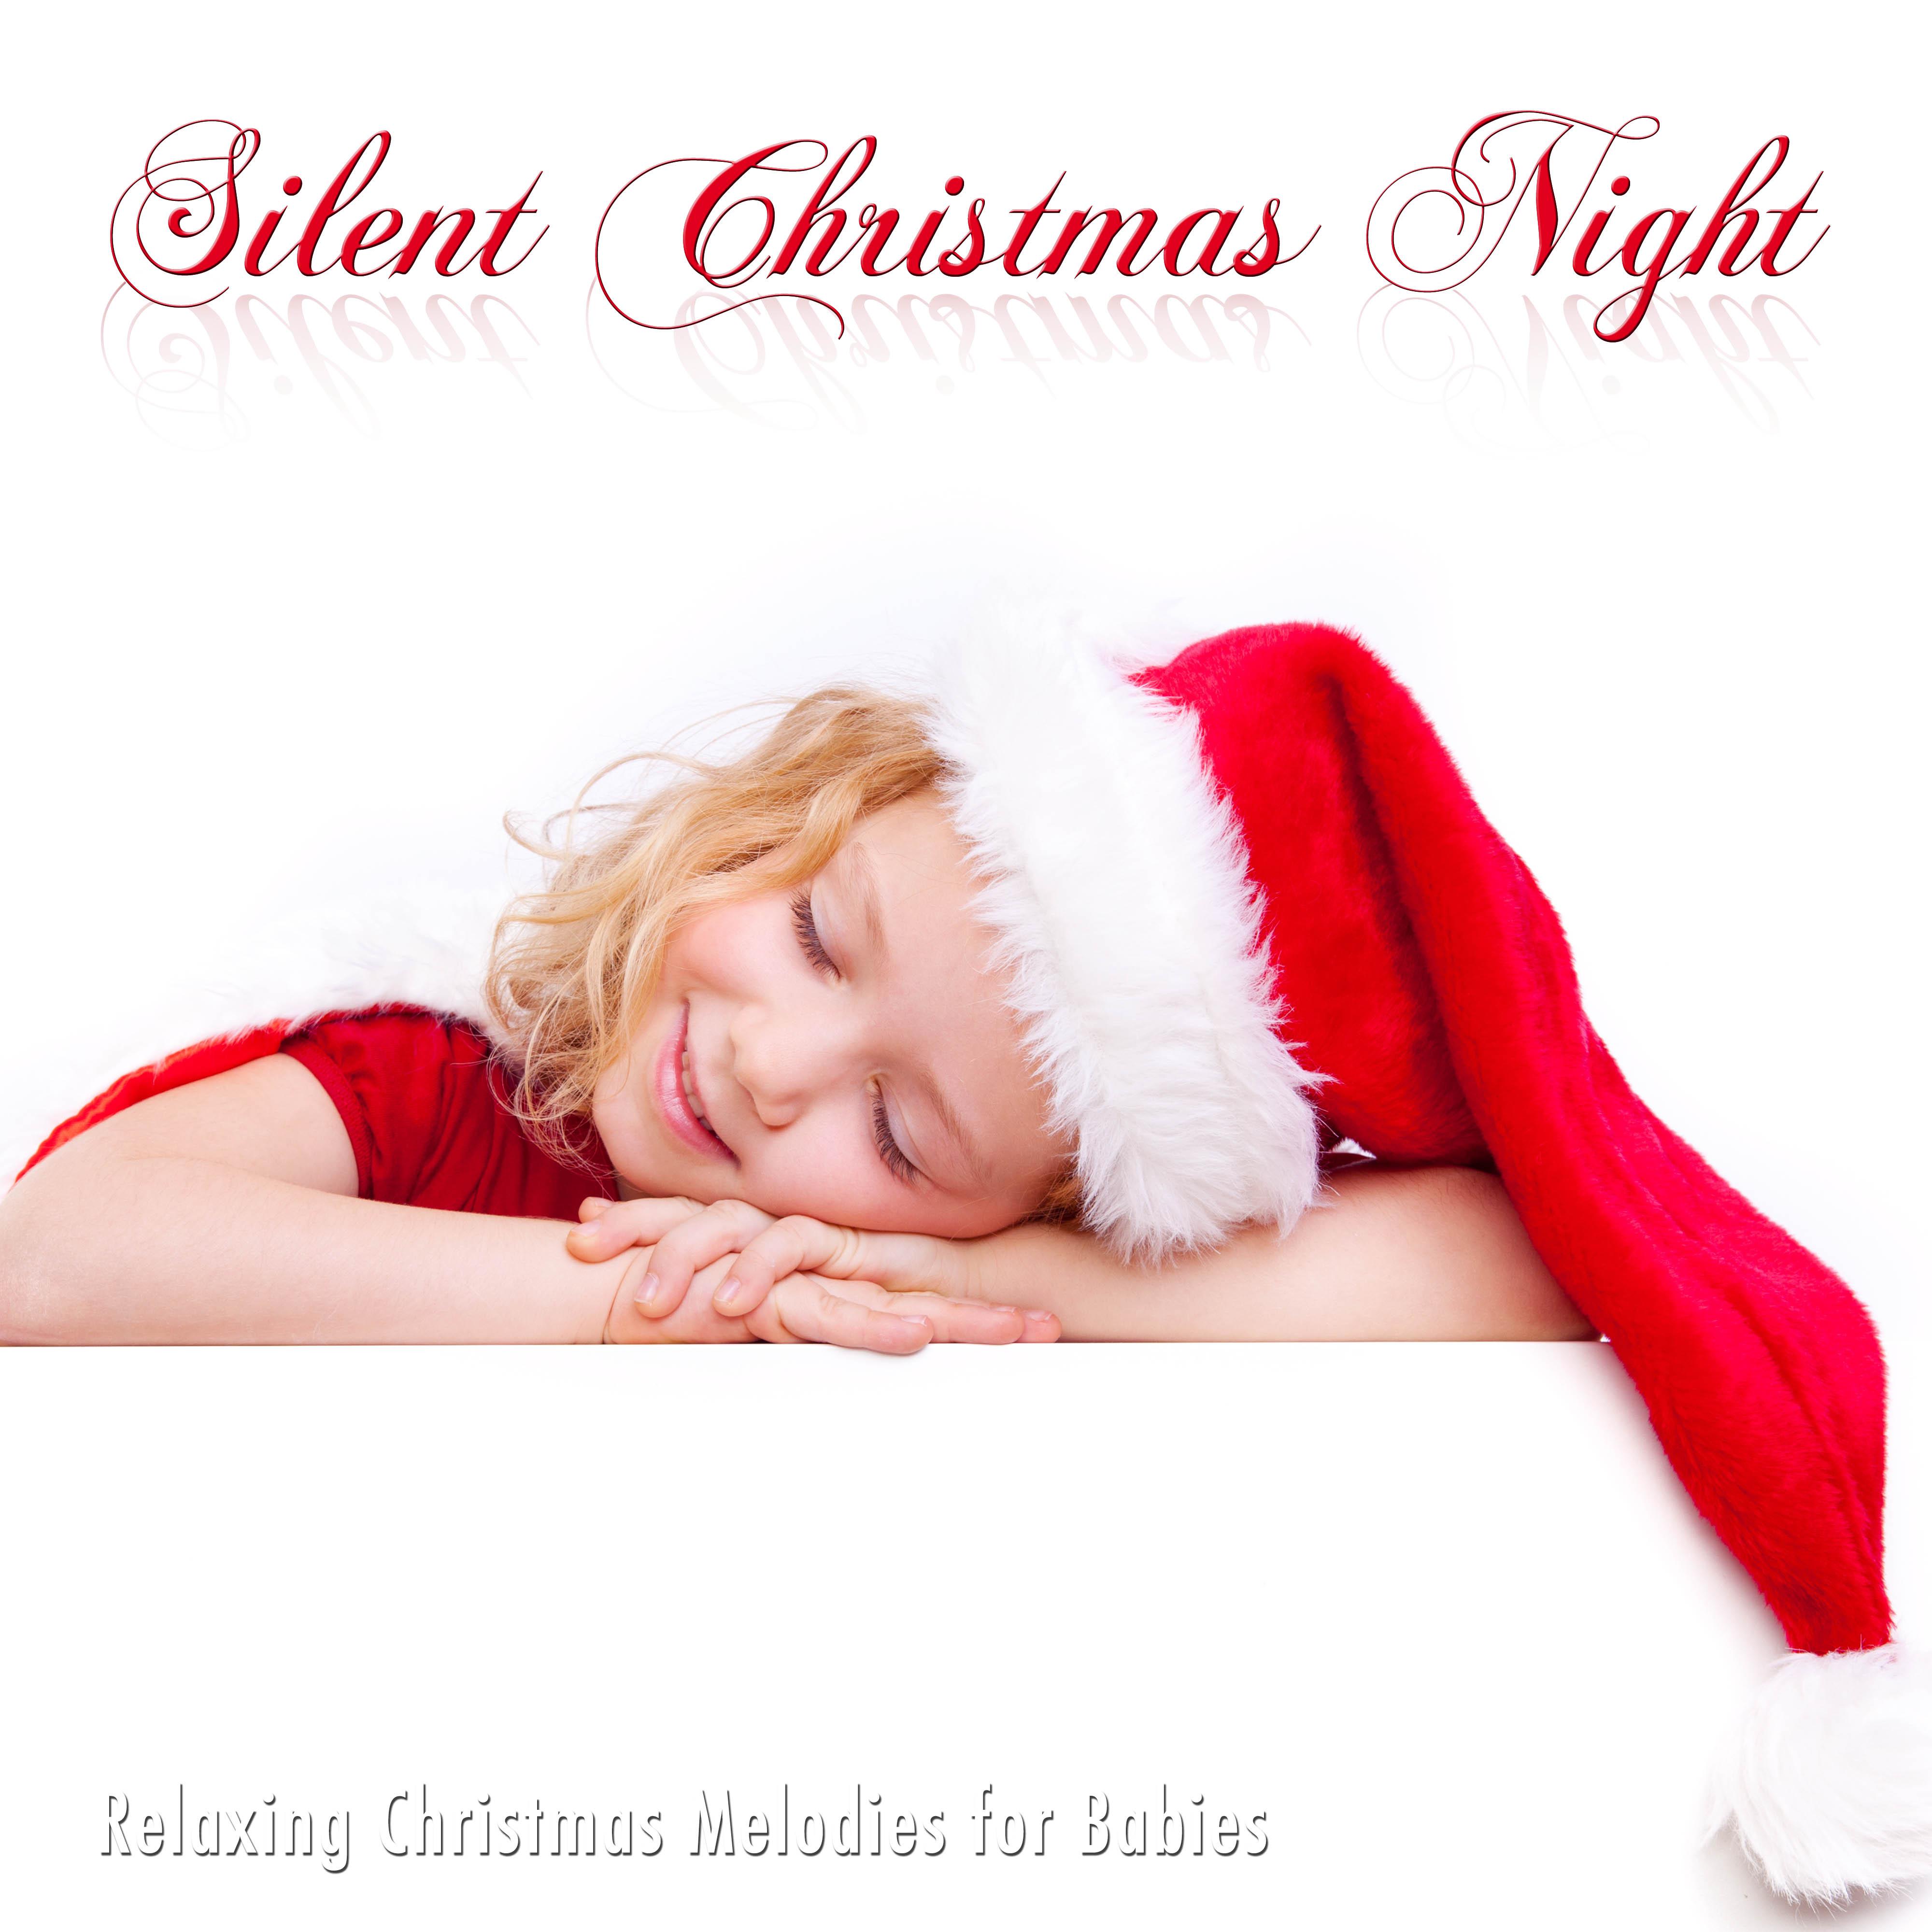 Silent Christmas Night: Relaxing Christmas Melodies to put Babies at Sleep